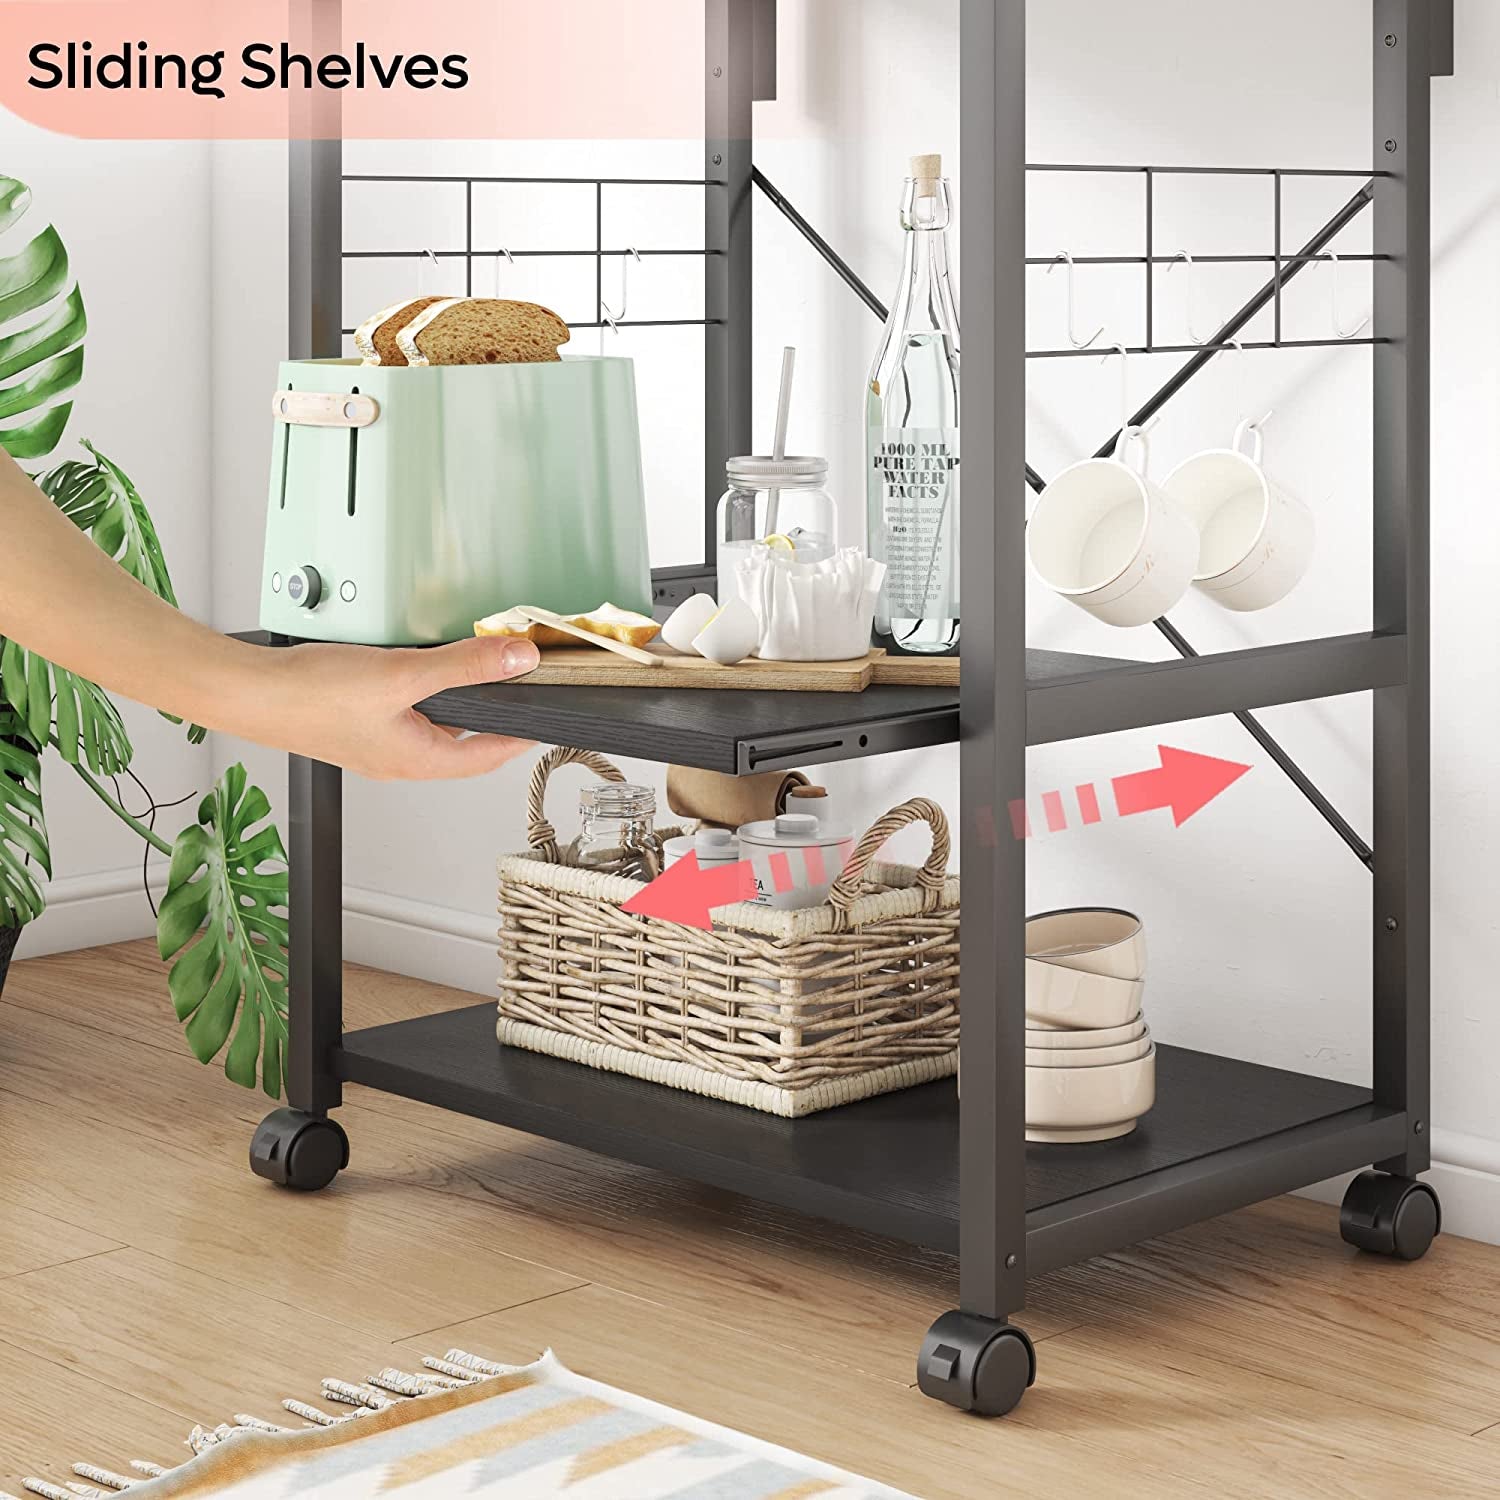 Kitchen Bakers Rack Microwave Stand Kitchen Cart on Wheels Utility Storage Shelf with 10 Side Hooks Kitchen Organizer Shelves with Adjustable Feet